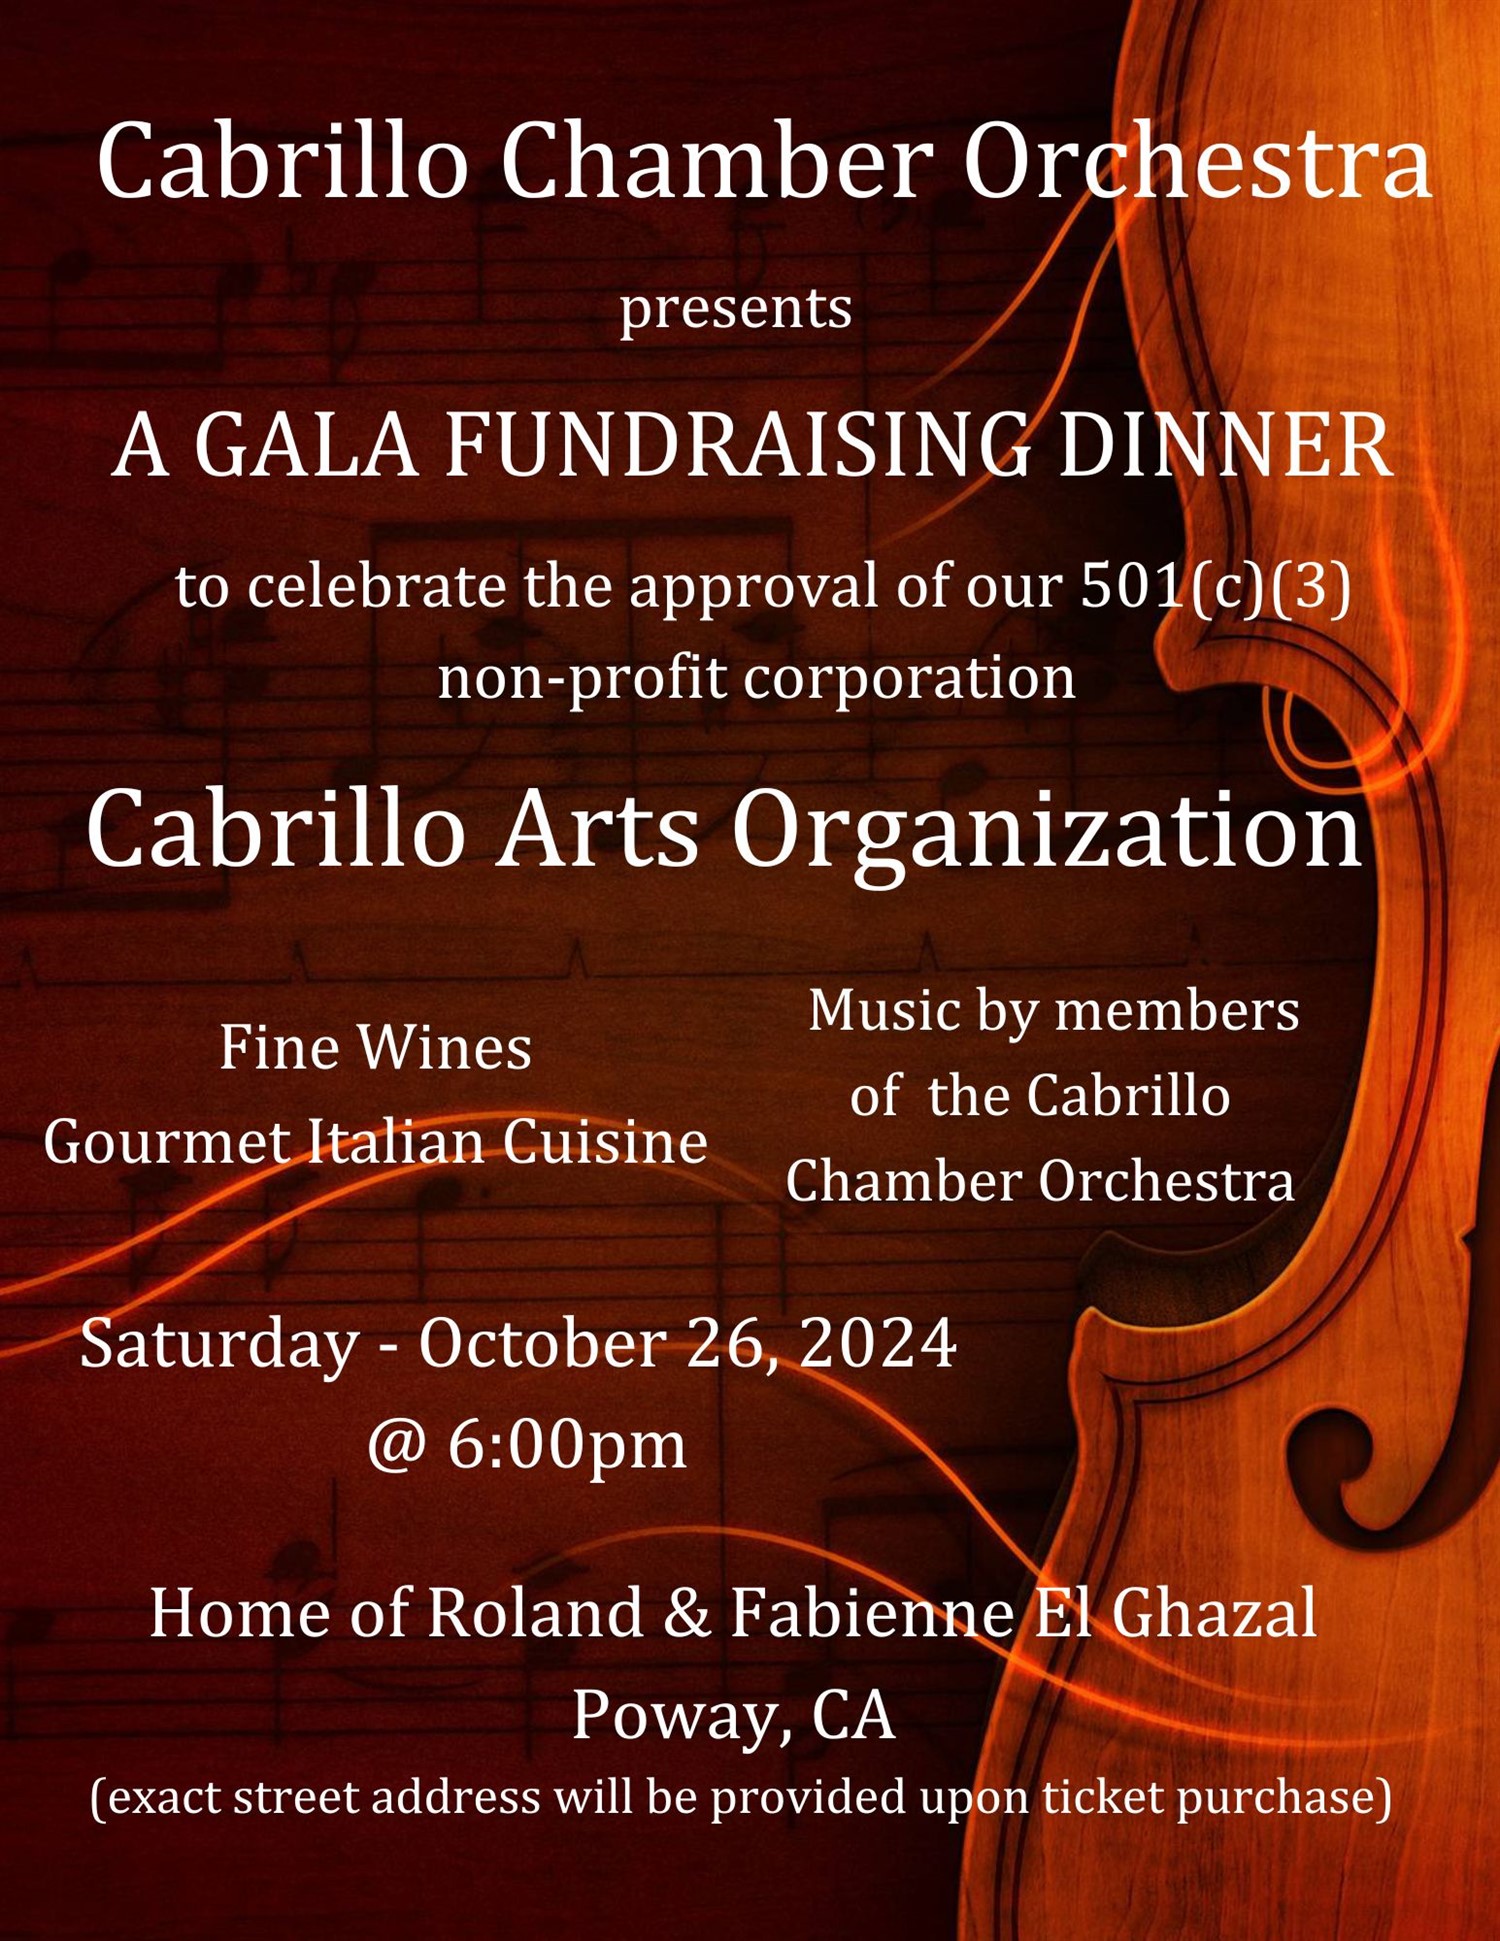 Cabrillo Arts Organization - Fundraiser Dinner  on Oct 26, 18:00@Home of Roland & Fabienne El Ghazal - Buy tickets and Get information on Cabrillo Chamber Orchestra 